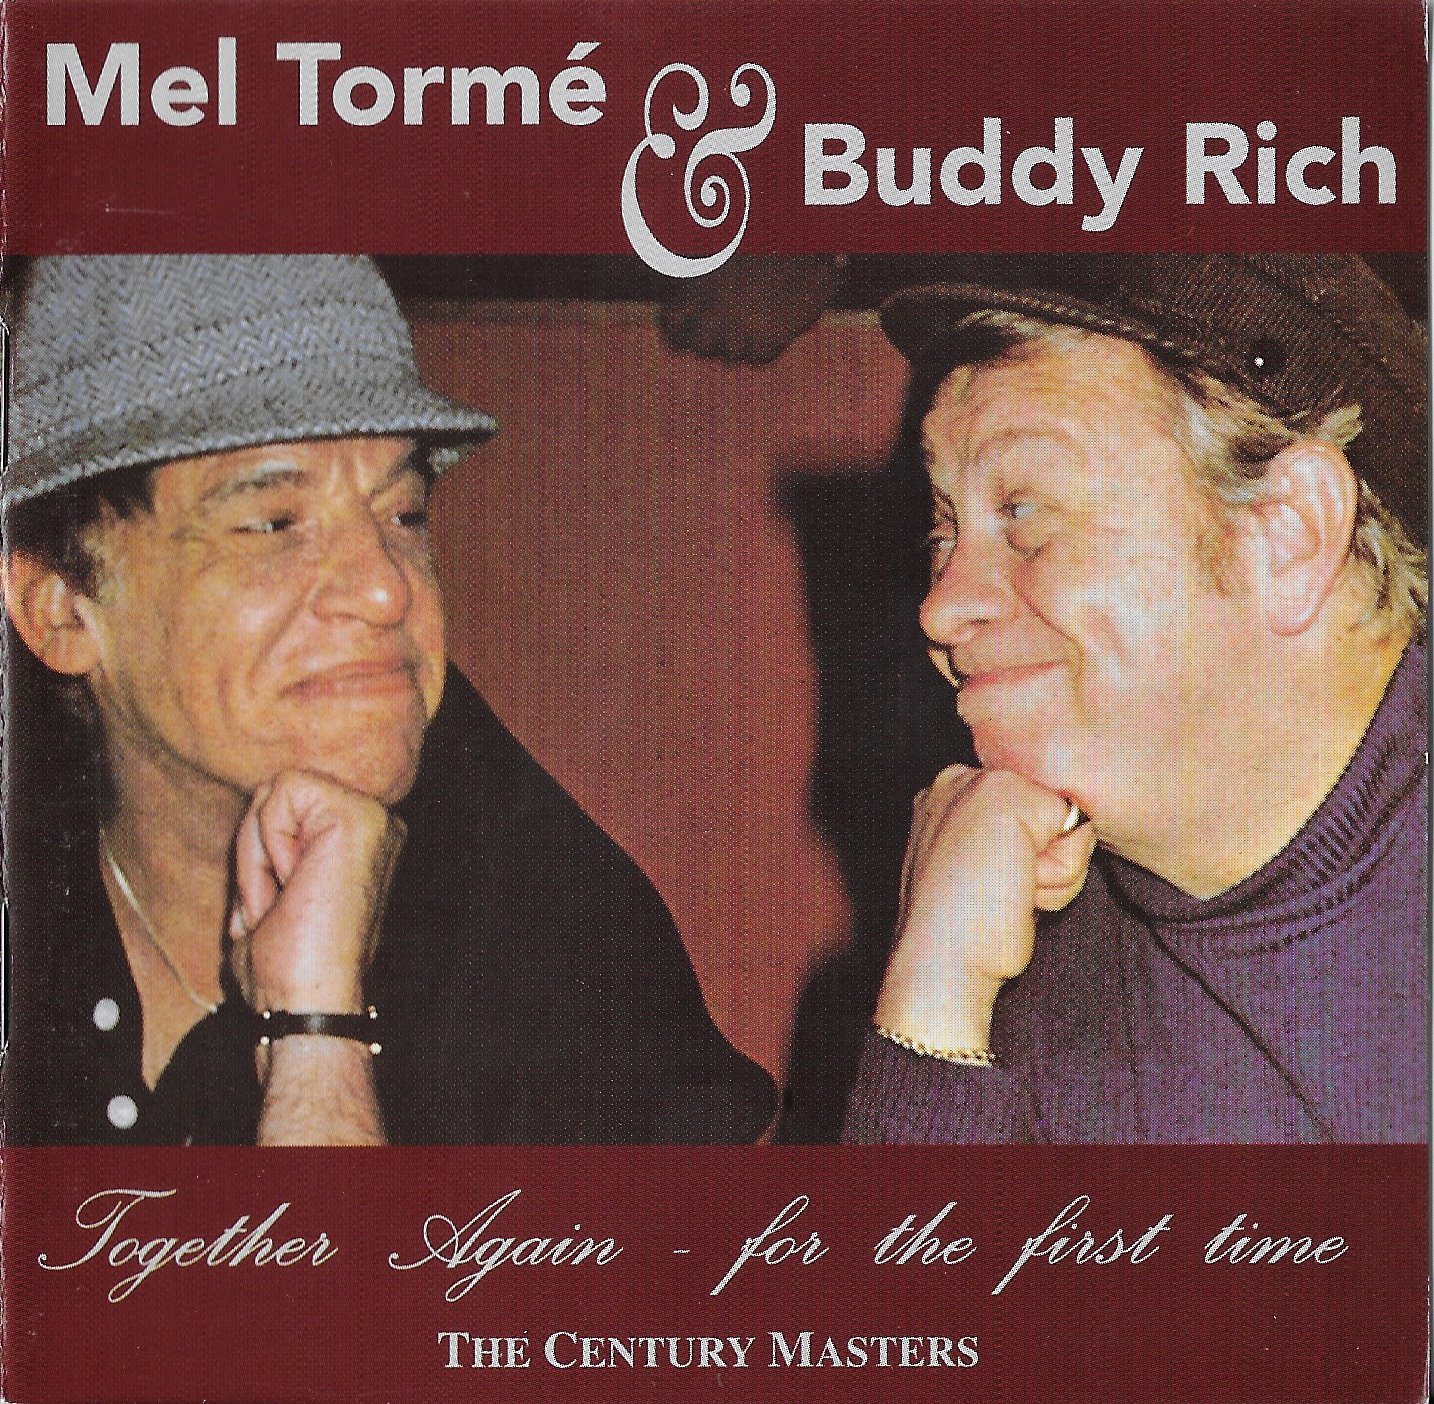 Picture of CJCD 833 The Century Catalogue - Together again for the first time by artist Mel Torme / Buddy Rich from the BBC cds - Records and Tapes library